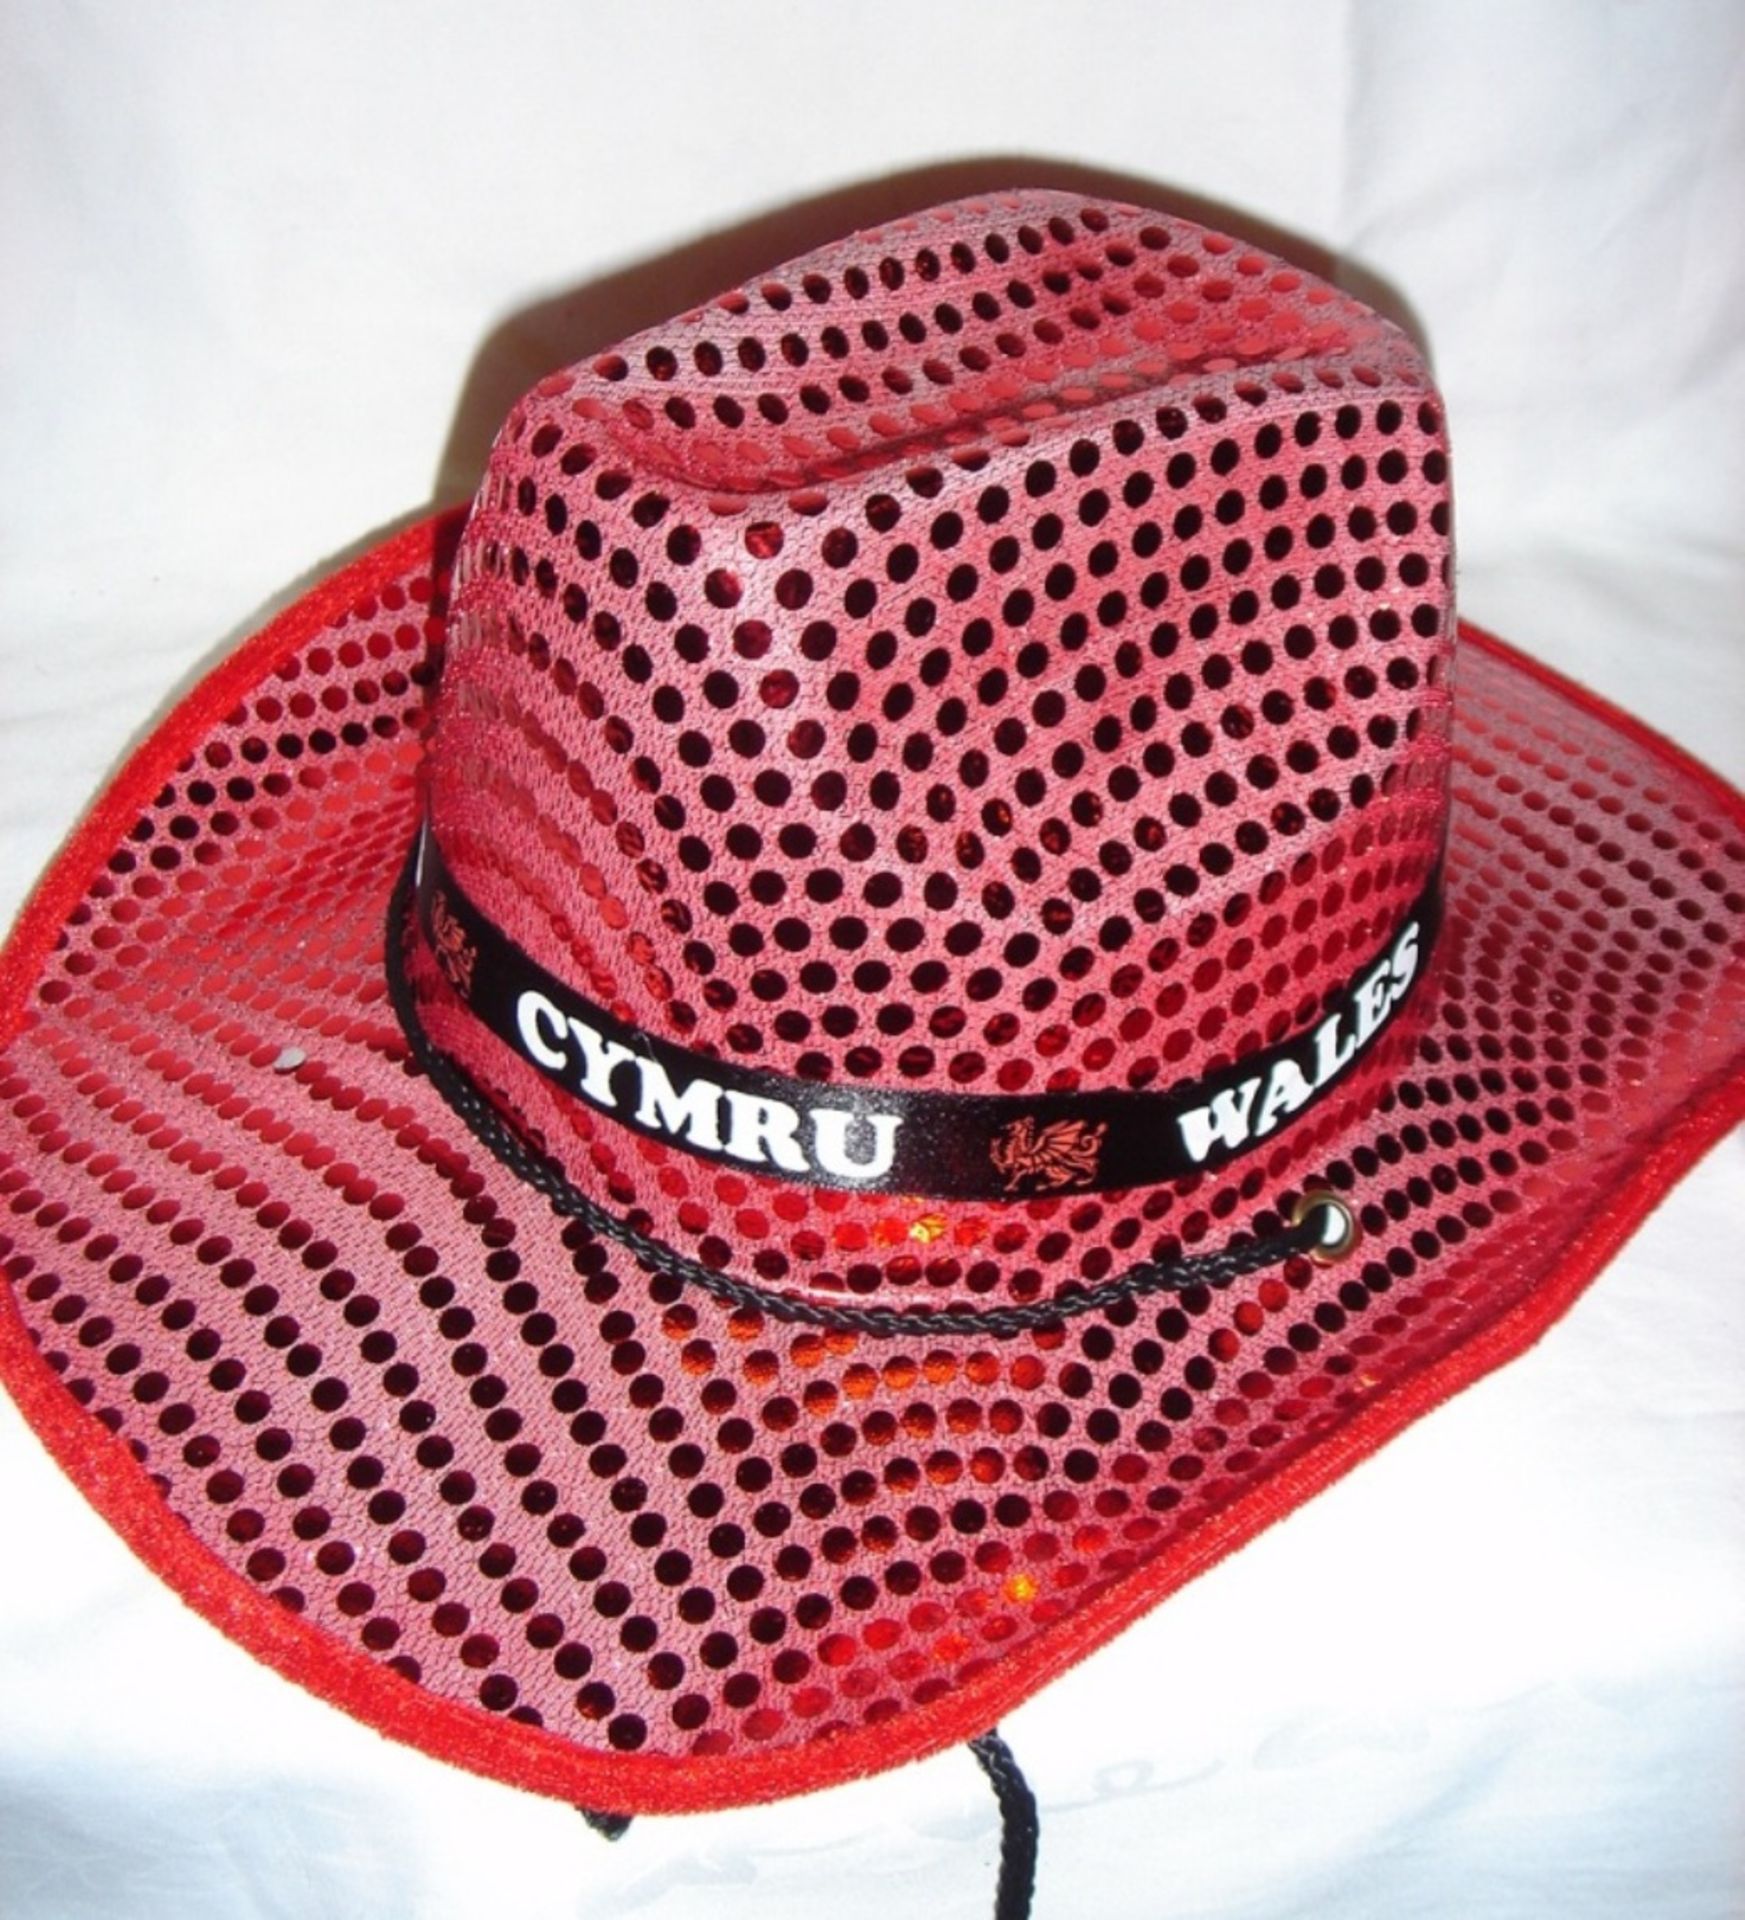 Approx 2,600 Novelty Red Sequin Cowboy Hats w/ Removable Welsh Ribbon - RRP£4.00